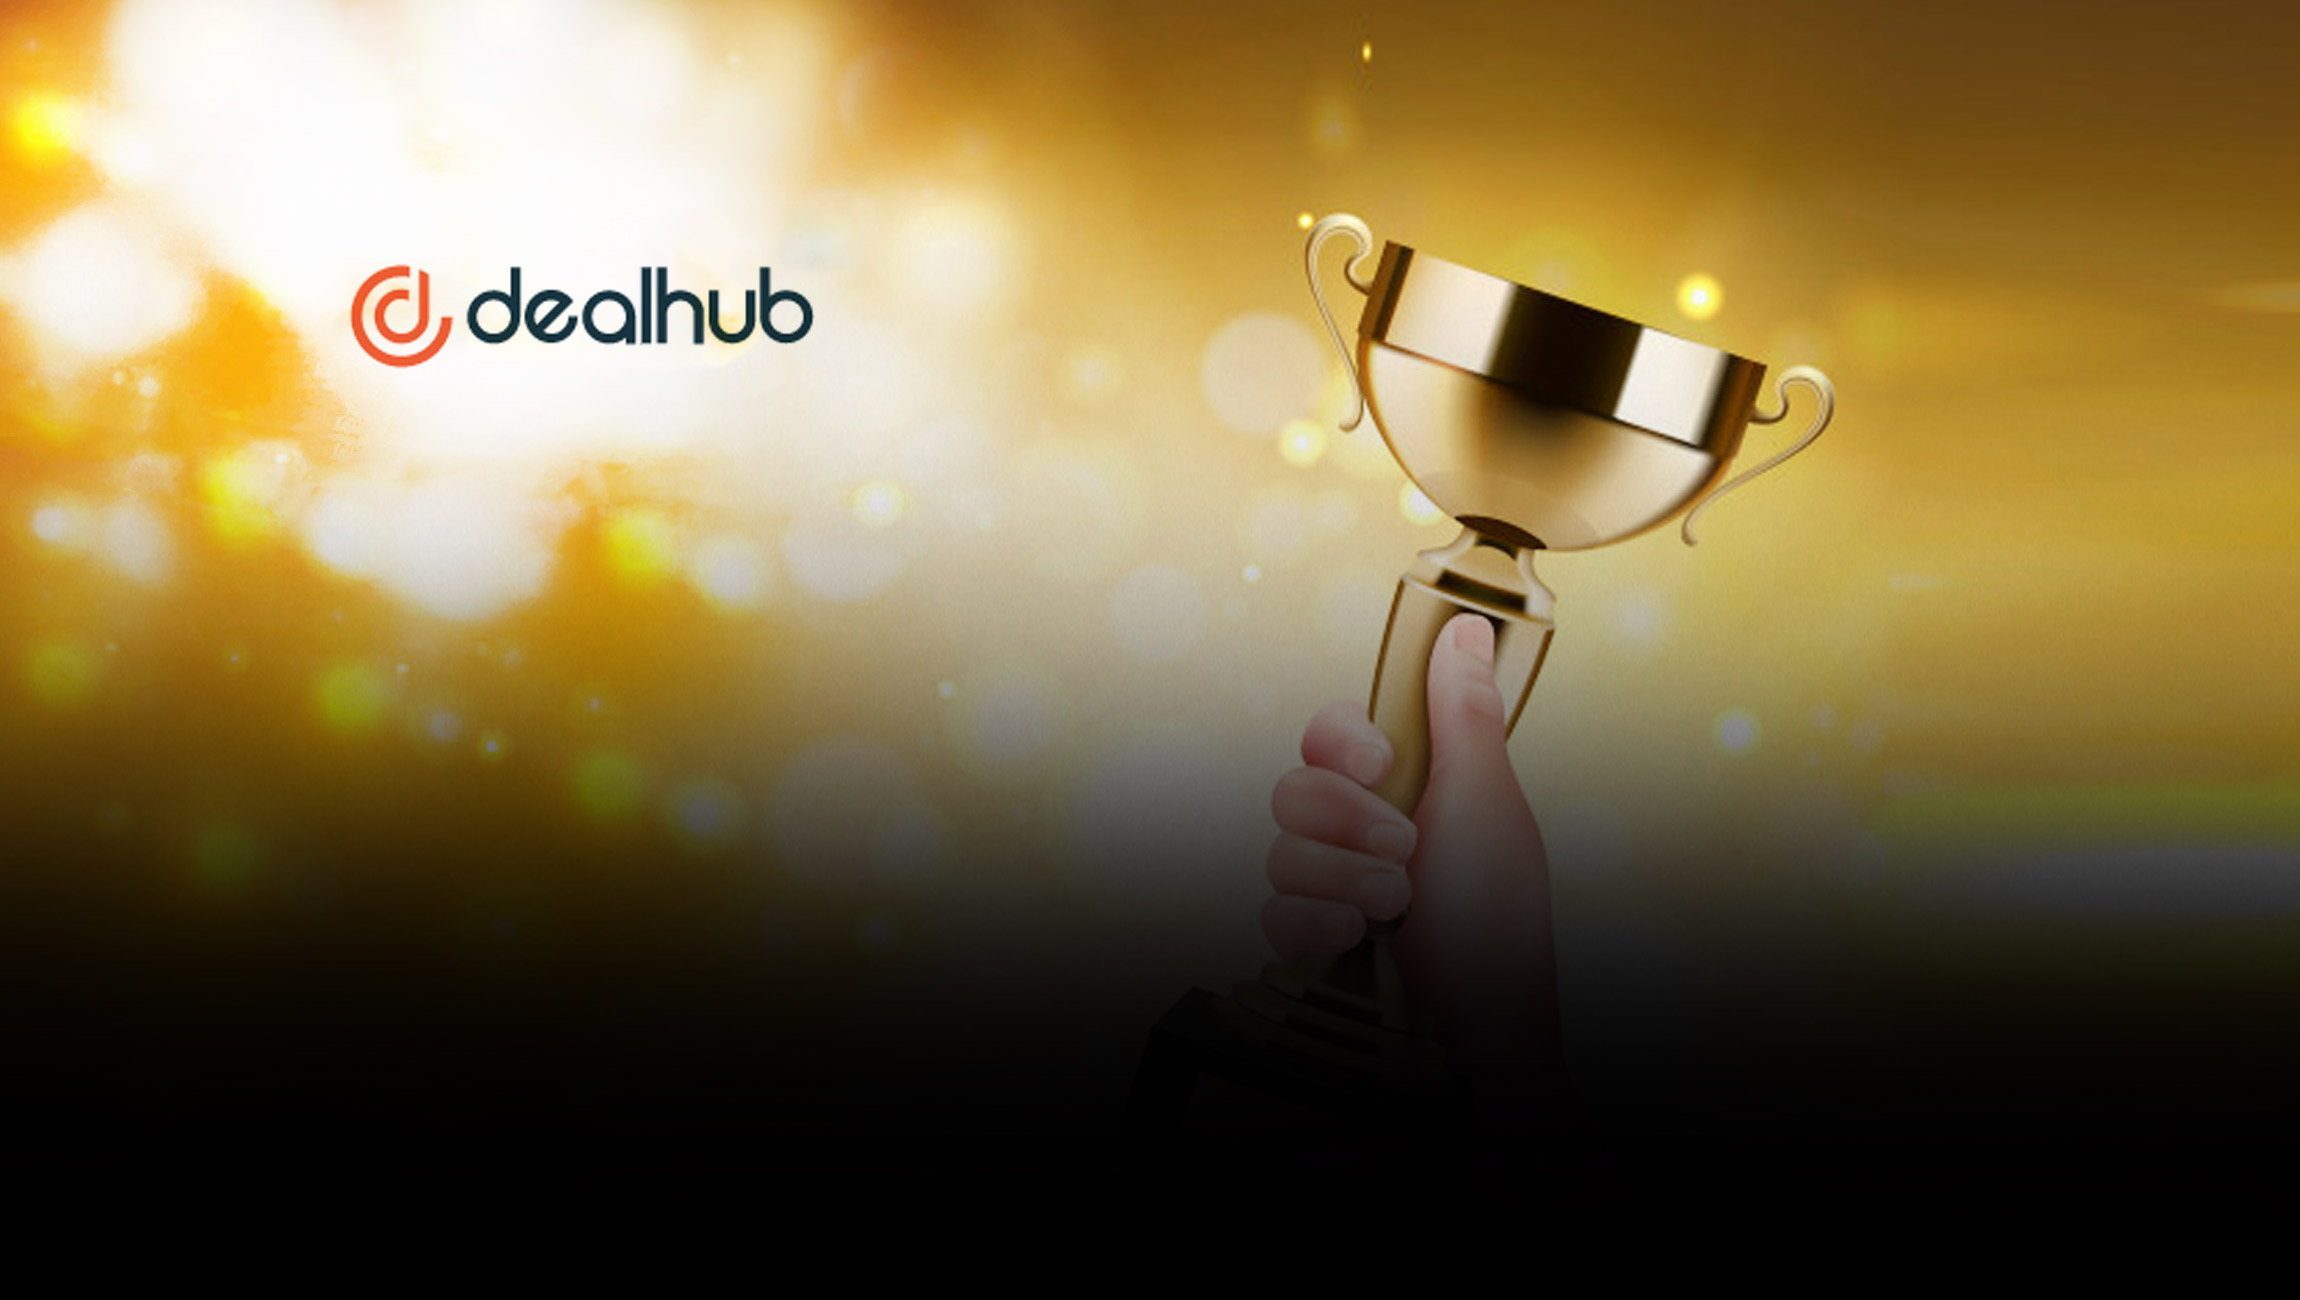 DealHub Recognized as Part of Top 50 Best Sales Products in 2021 by G2 Software Awards